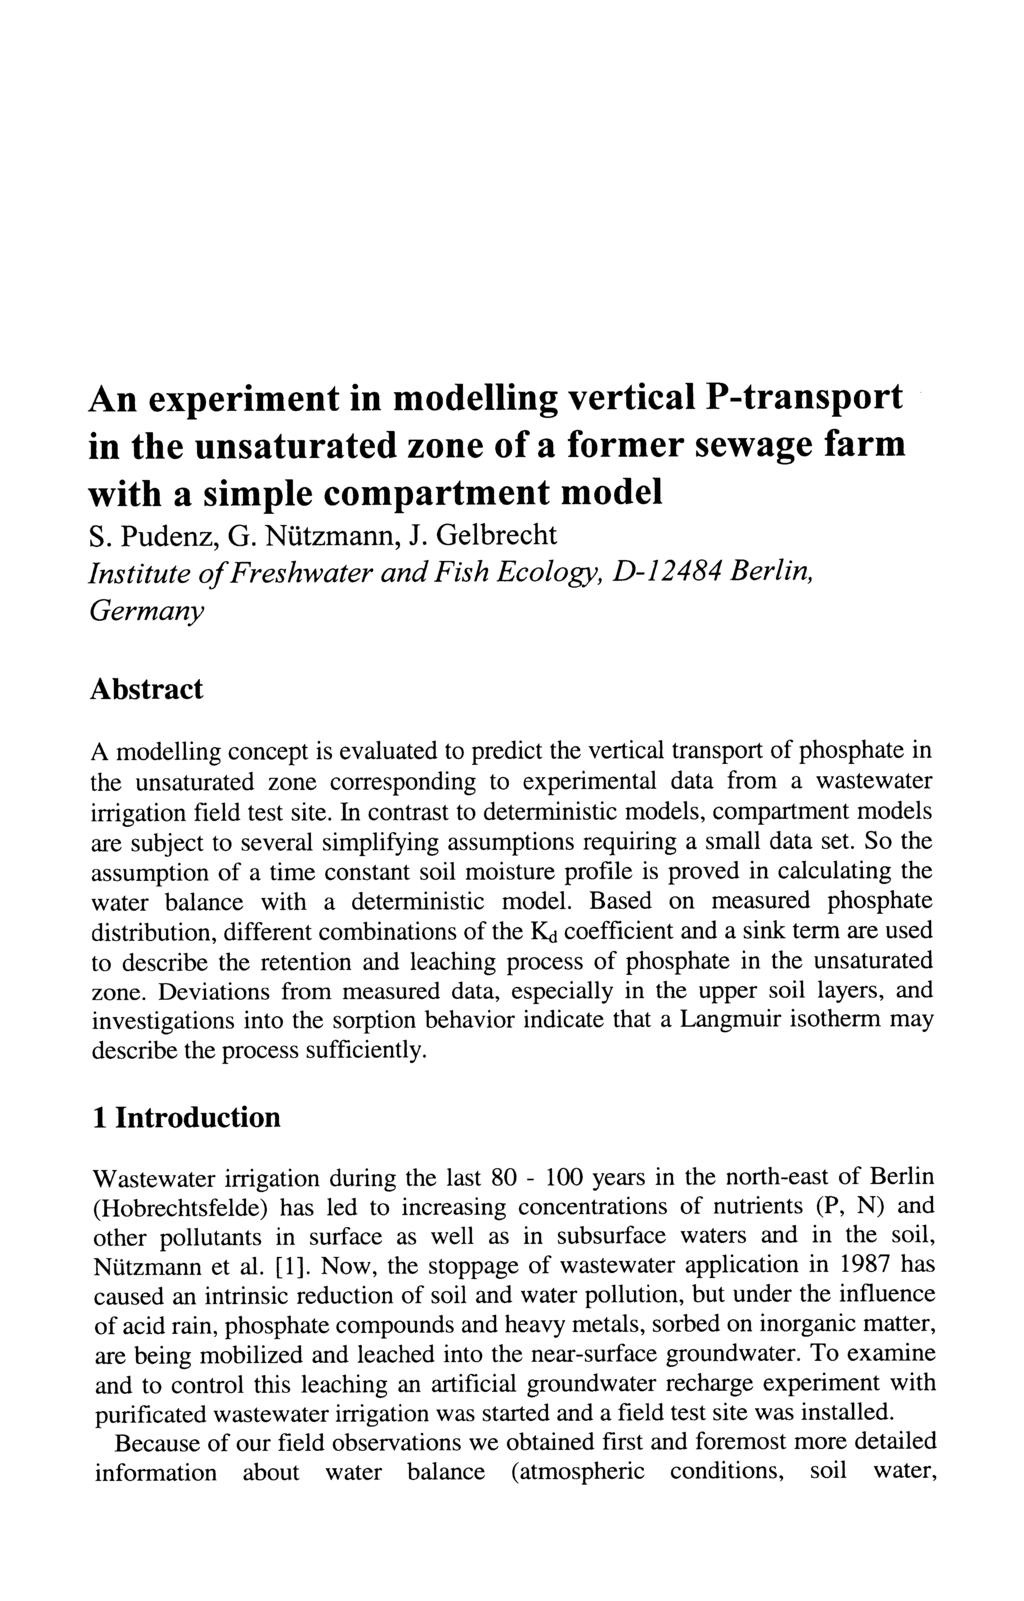 An experiment in modelling vertical P-transport in the unsaturated zone of a former sewage farm with a simple compartment model S. Pudenz, G. Nutzmann, J.